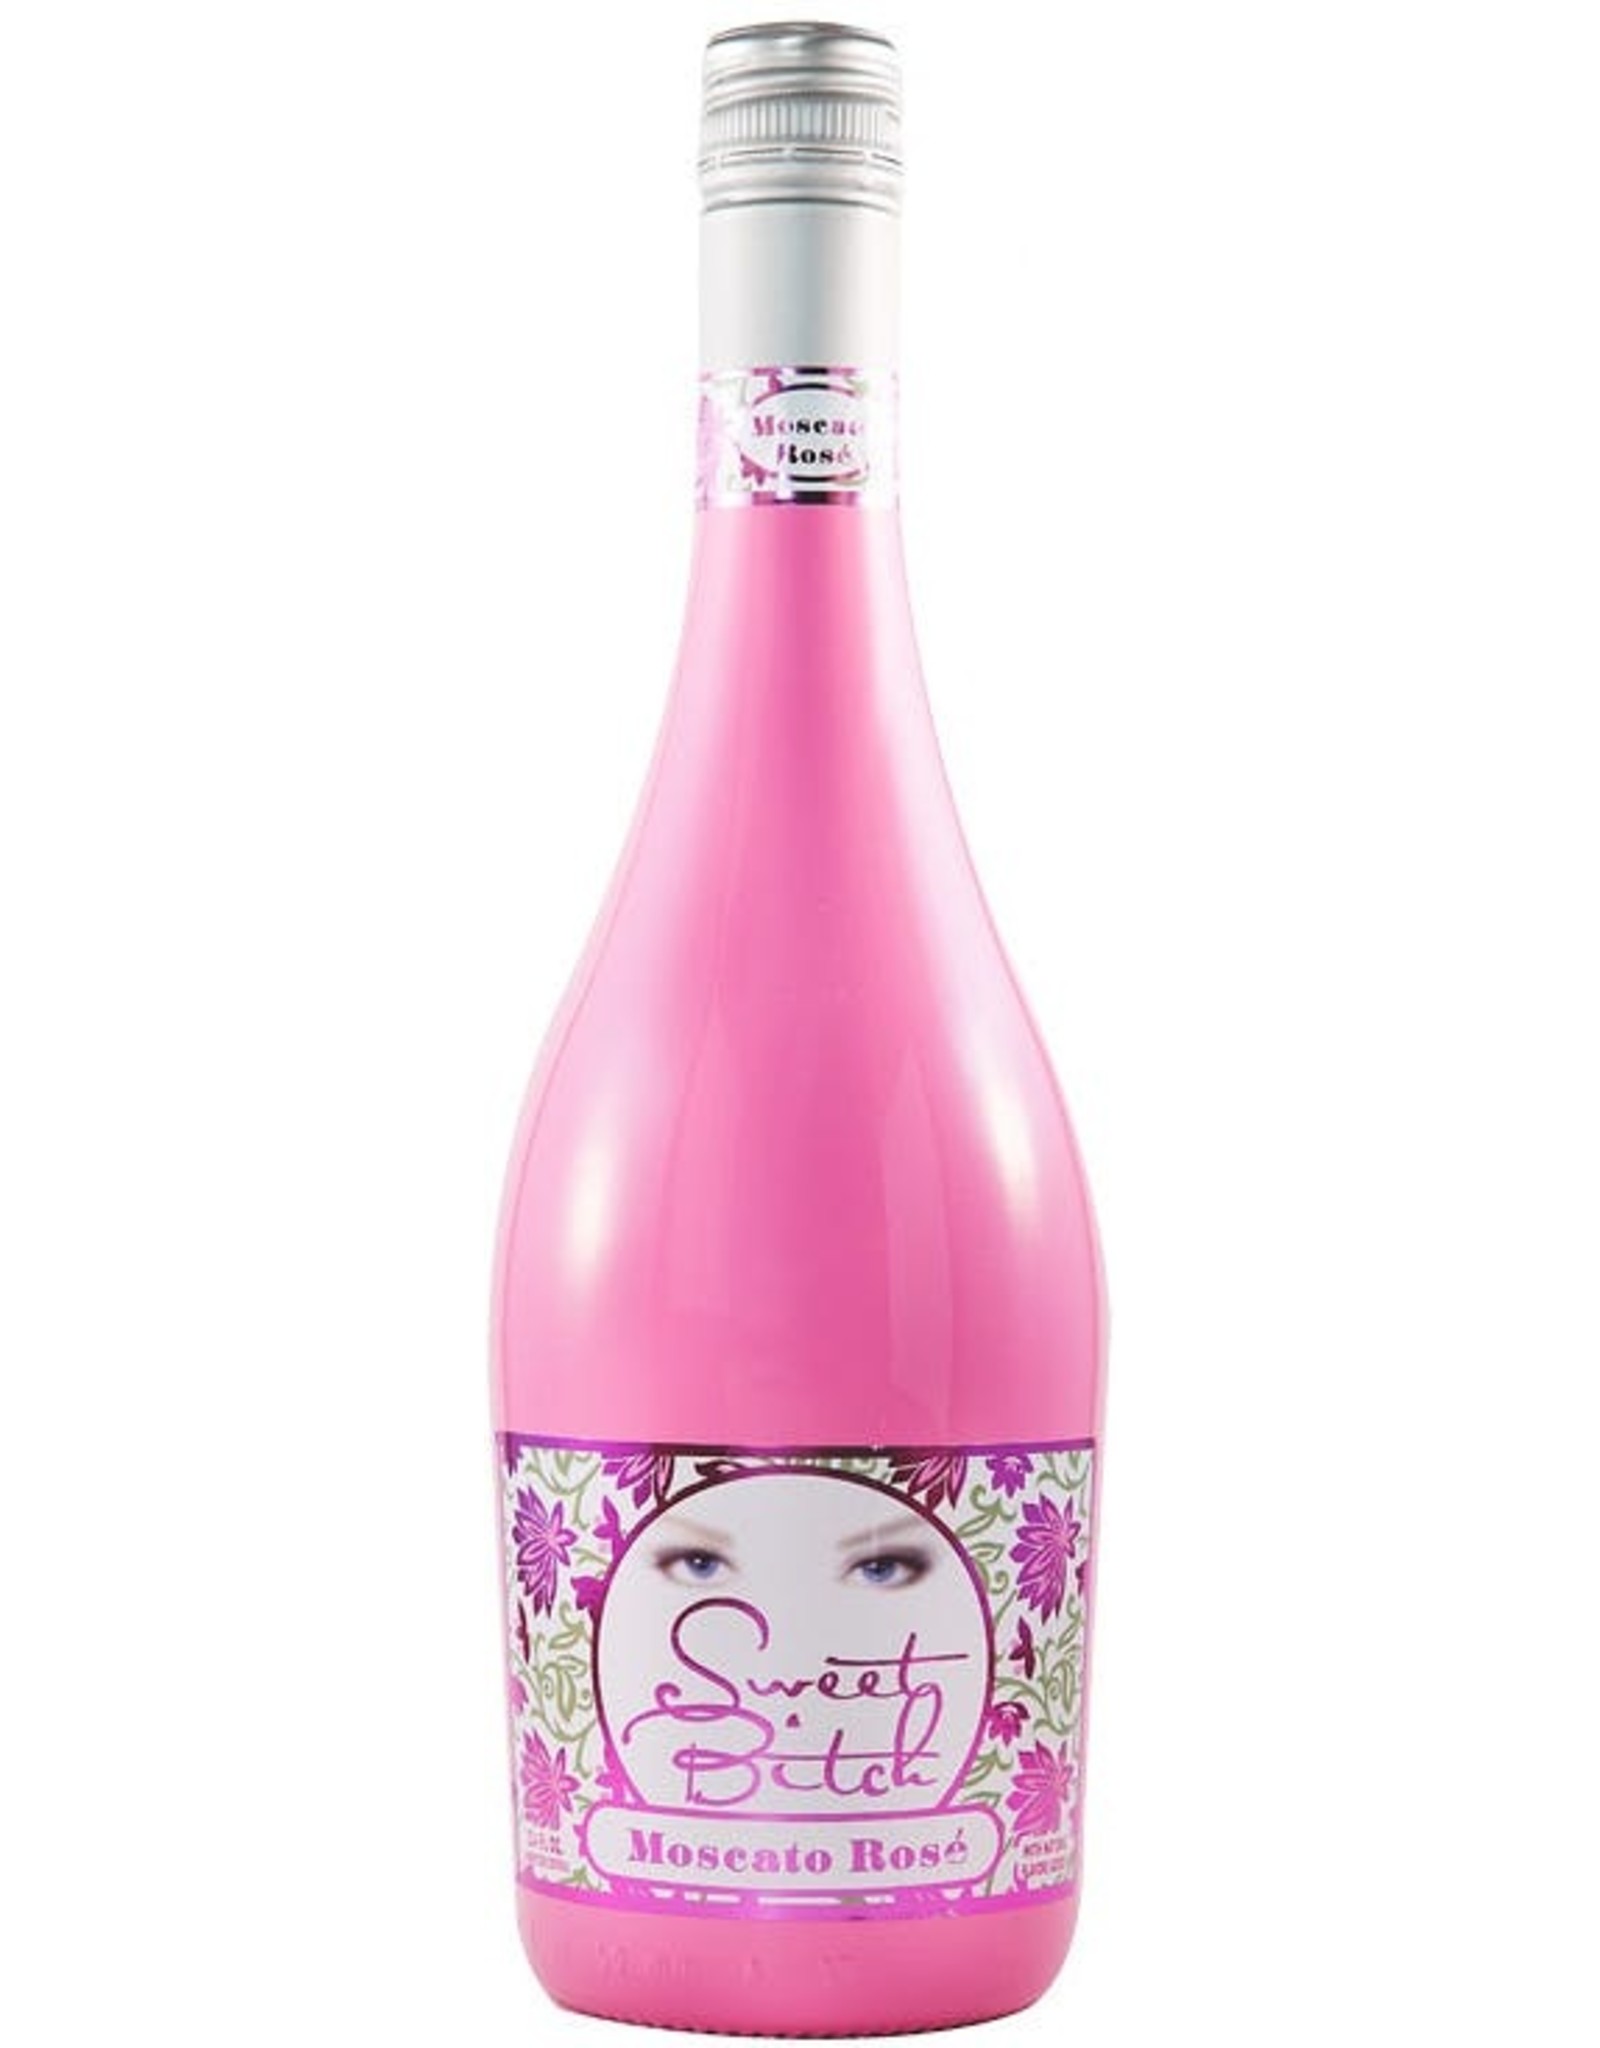 SWEET BITCH MOSCATO ROSE PAINTED 750ML